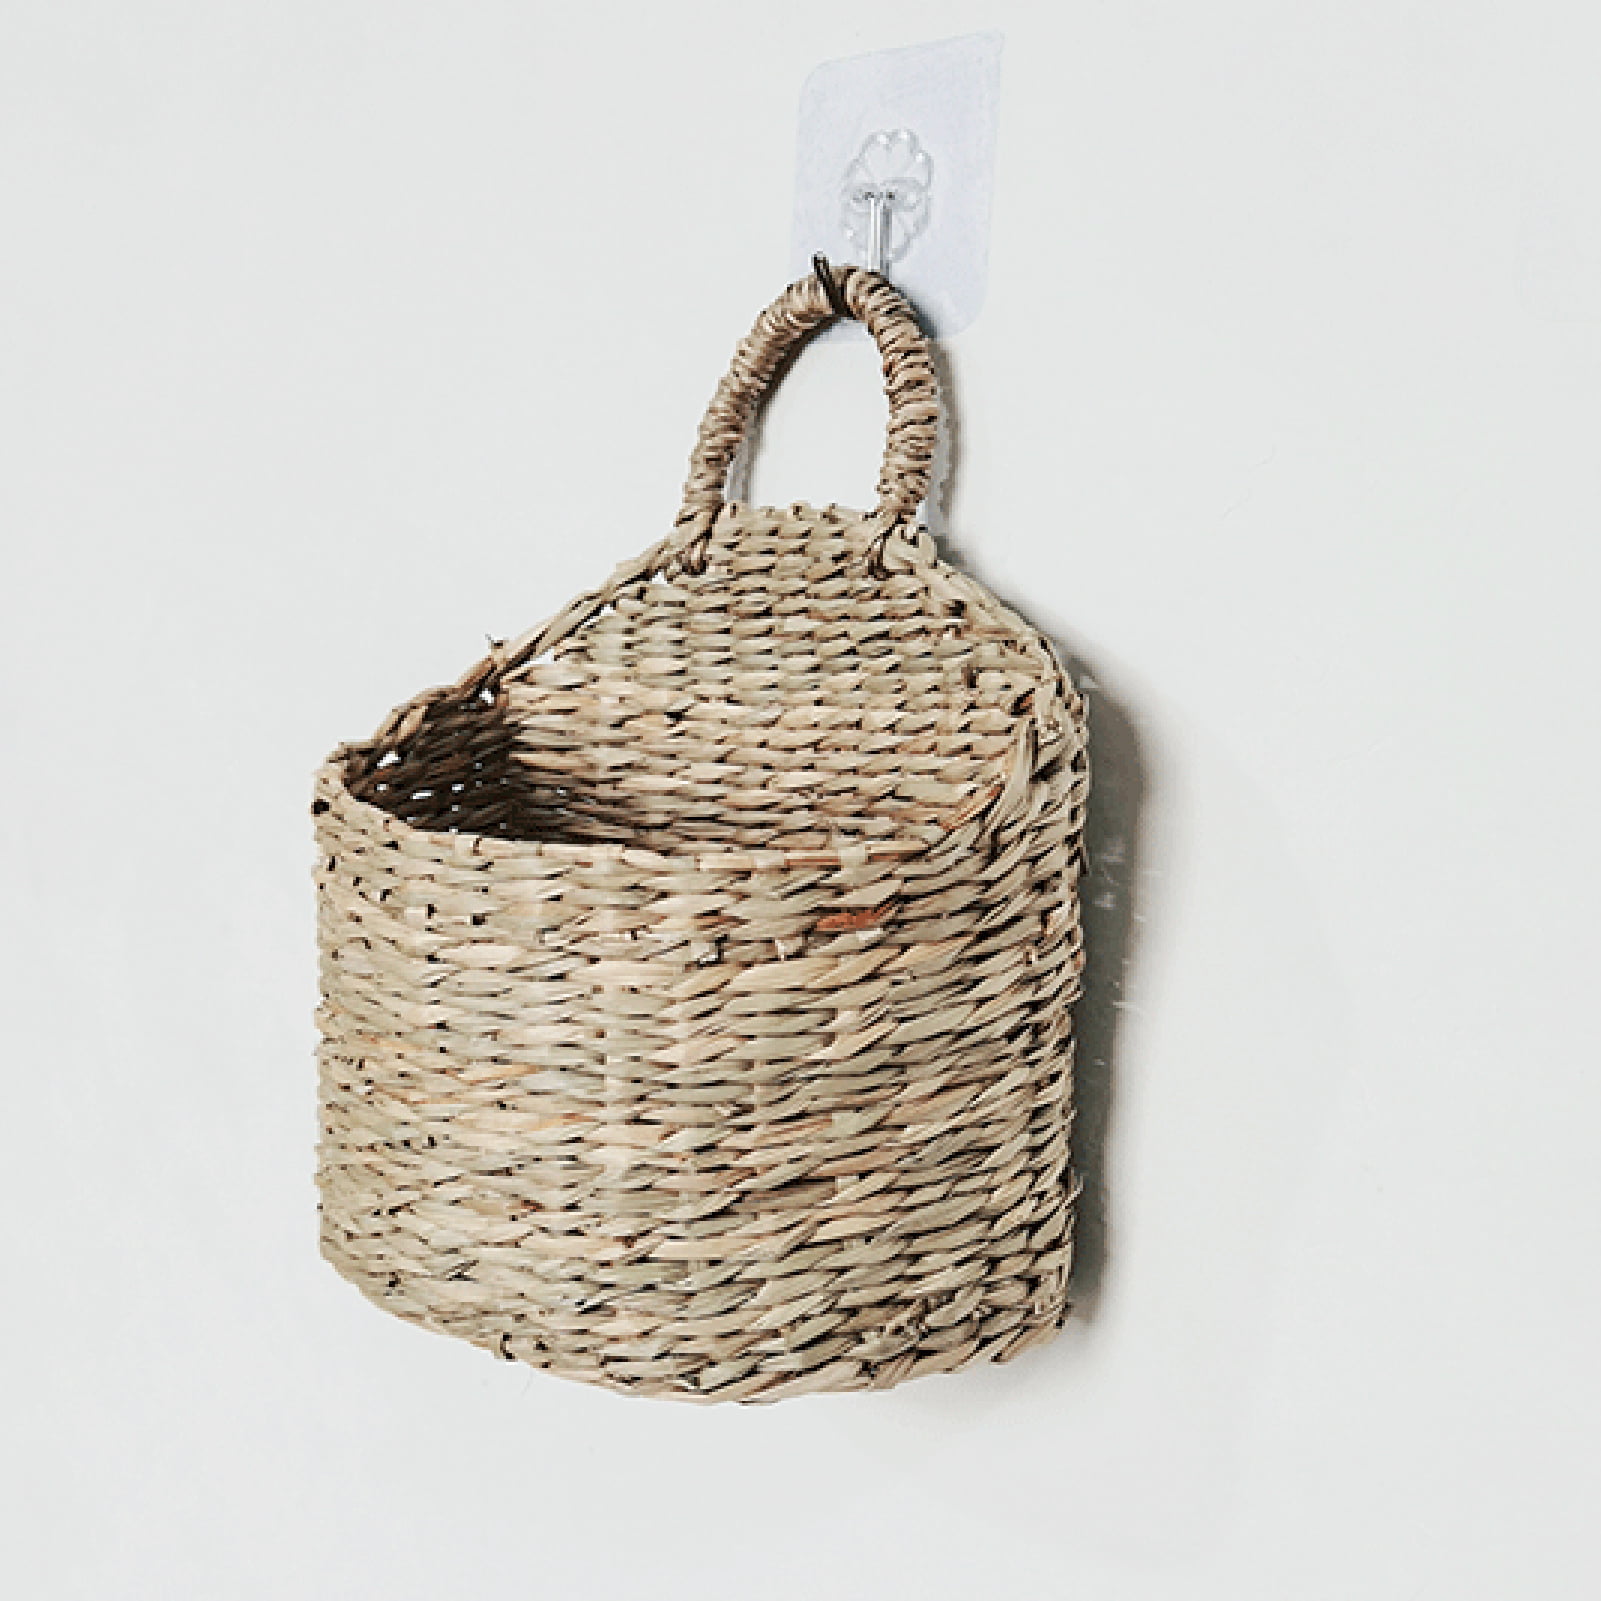 1PC Rustic Eco-Friendly Straw Good Quality Storage Basket Woven Basket for Home 